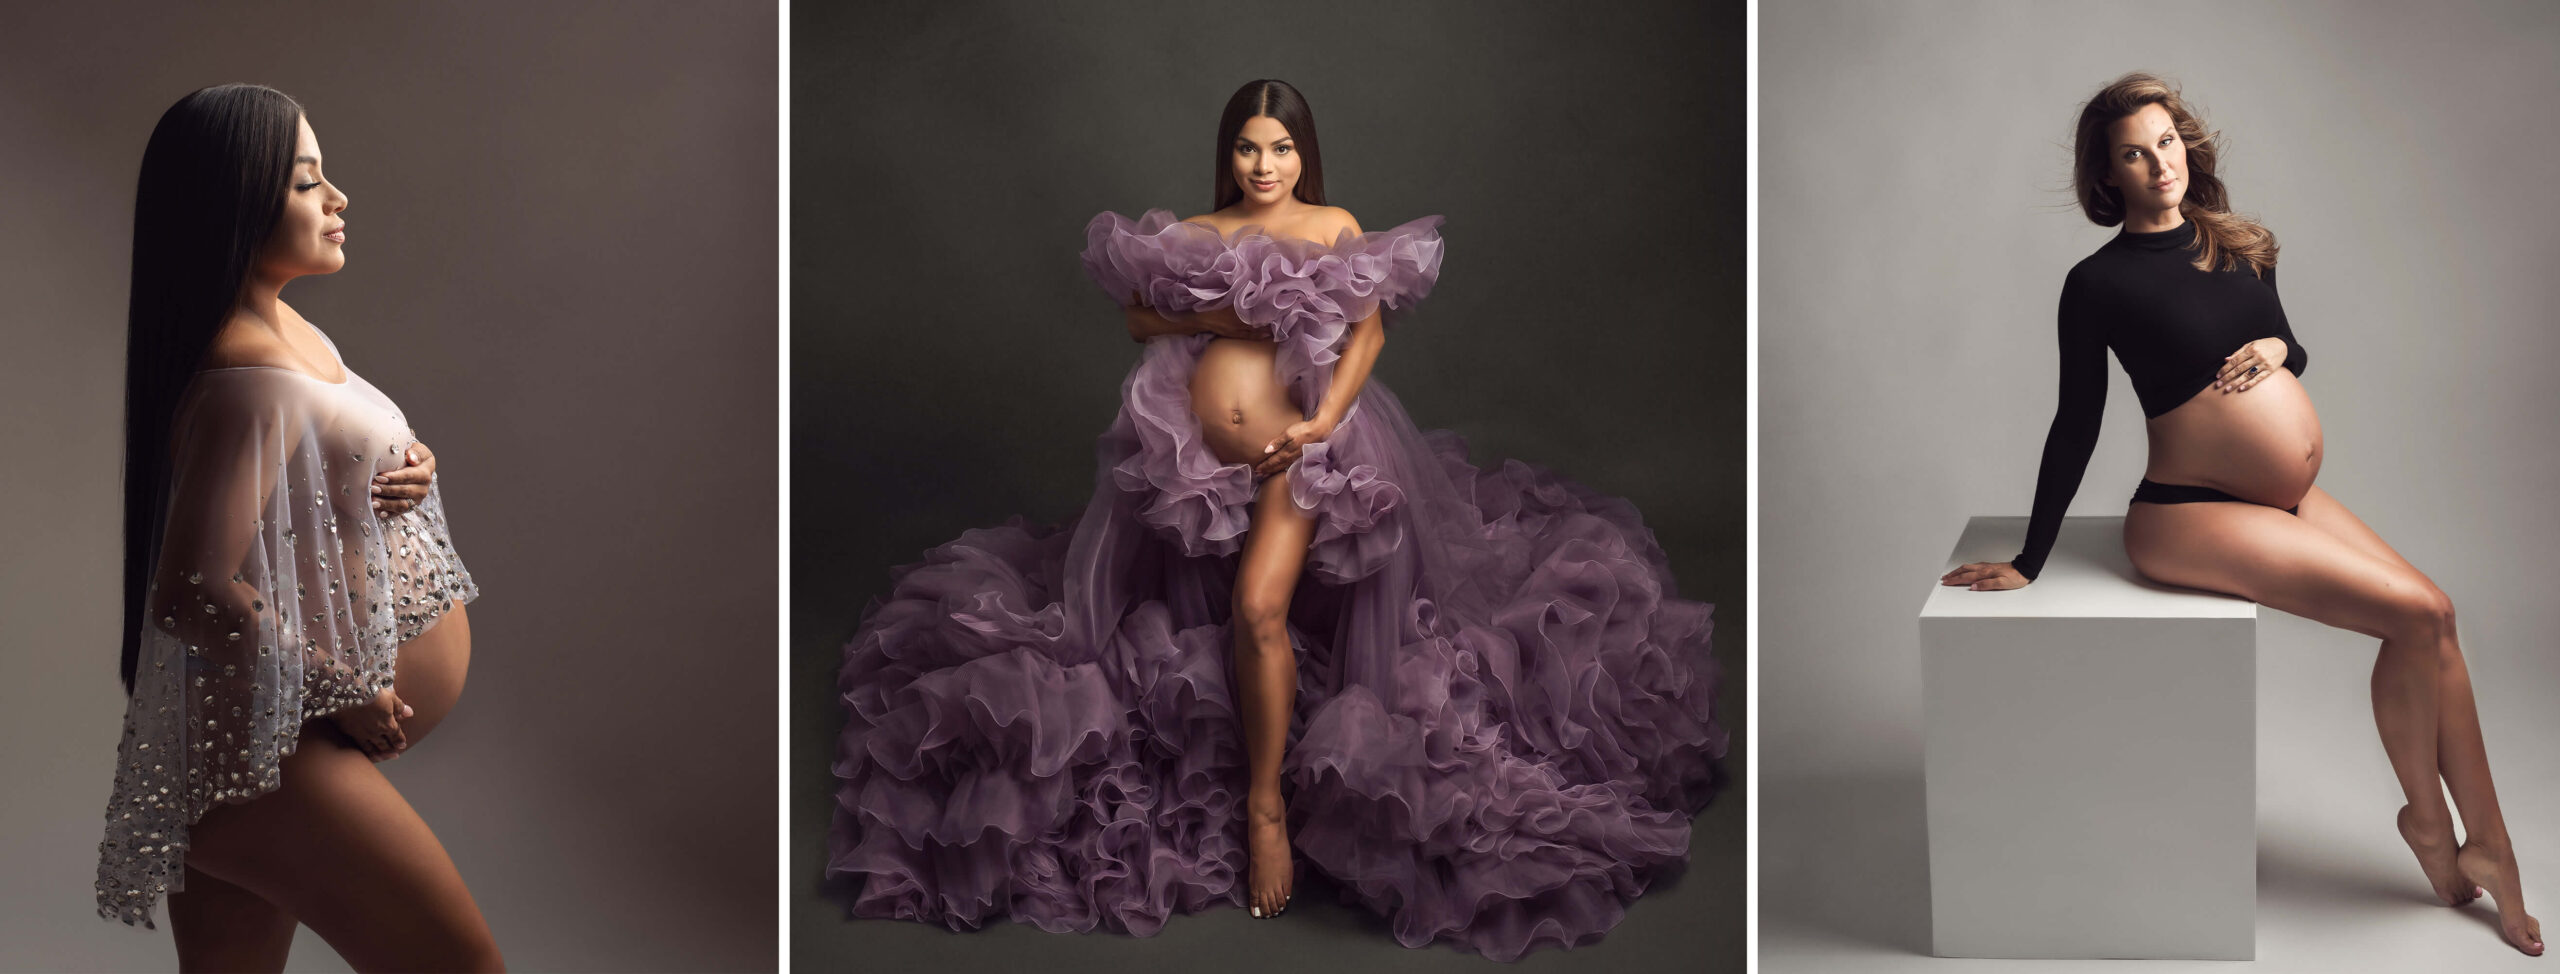 Maternity Photographer photographing beautiful women in gorgeous dresses at a photography studio in South Florida